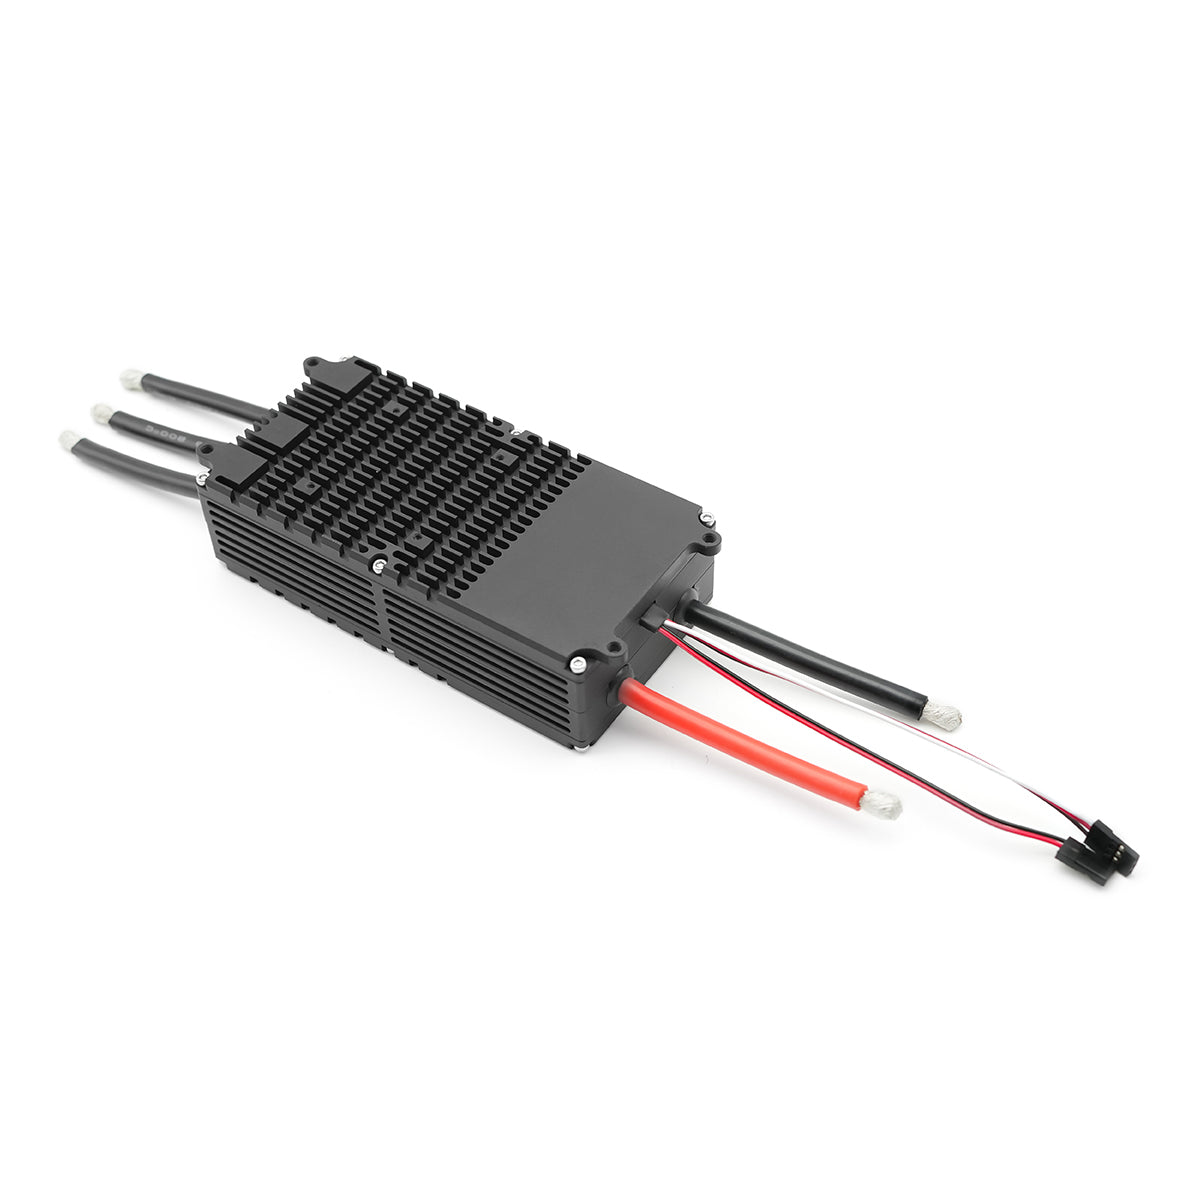 FRC 150A 12-24S Electronic Speed Controller Brushless Motor Drone ESC For Drone Multicopter EVTOL Airplane